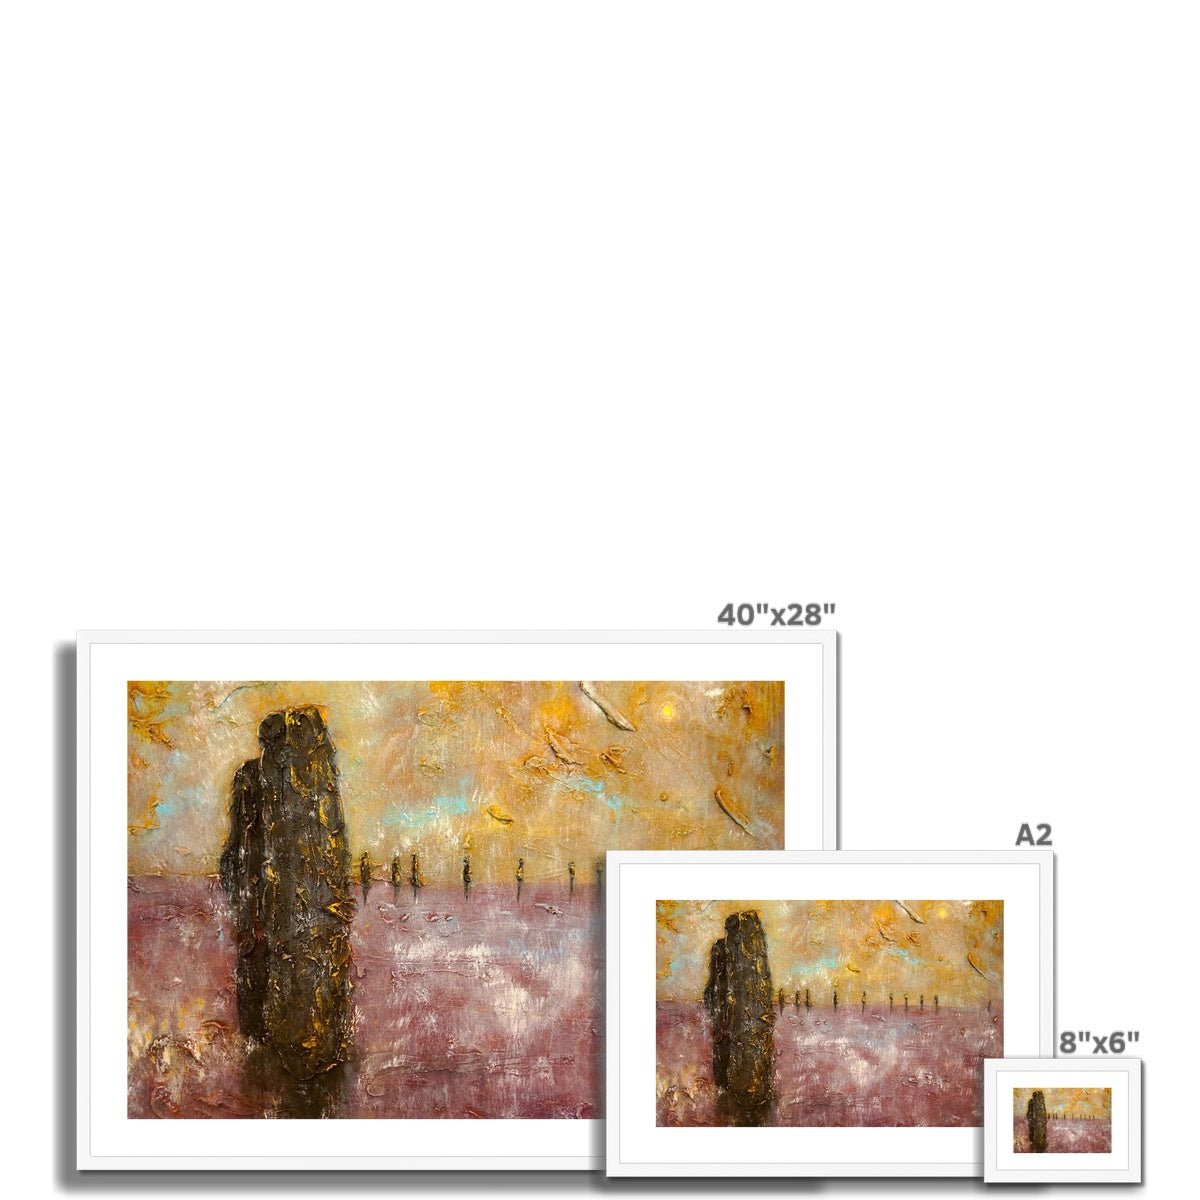 Brodgar Mist Orkney Painting | Framed & Mounted Prints From Scotland-Framed & Mounted Prints-Orkney Art Gallery-Paintings, Prints, Homeware, Art Gifts From Scotland By Scottish Artist Kevin Hunter